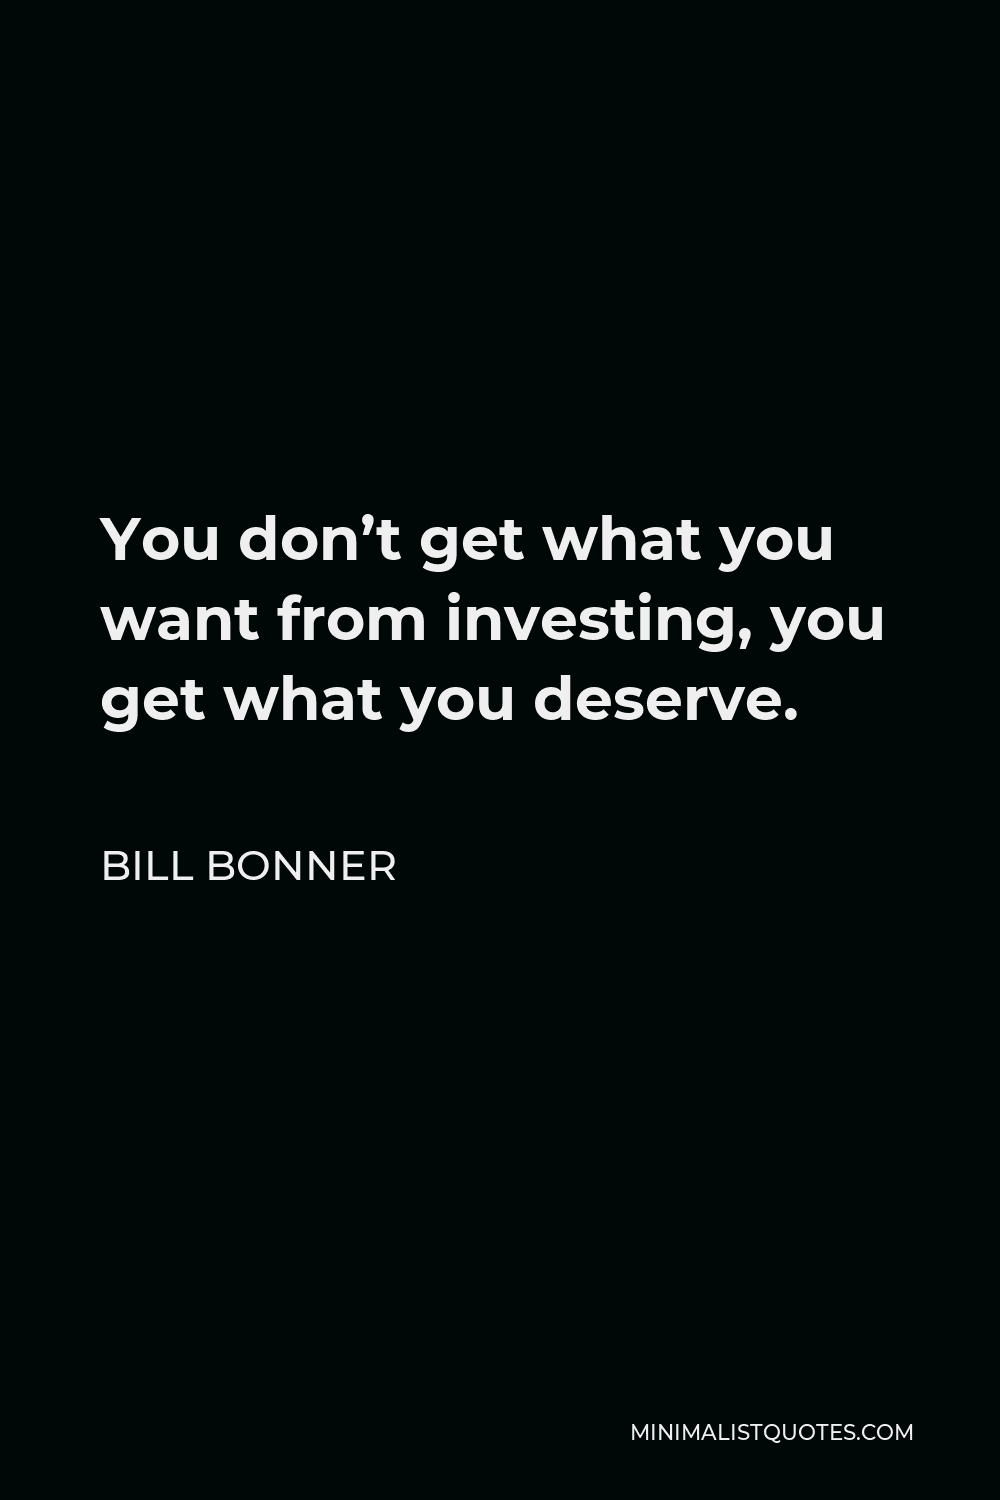 Bill Bonner Quote - You don’t get what you want from investing, you get what you deserve.